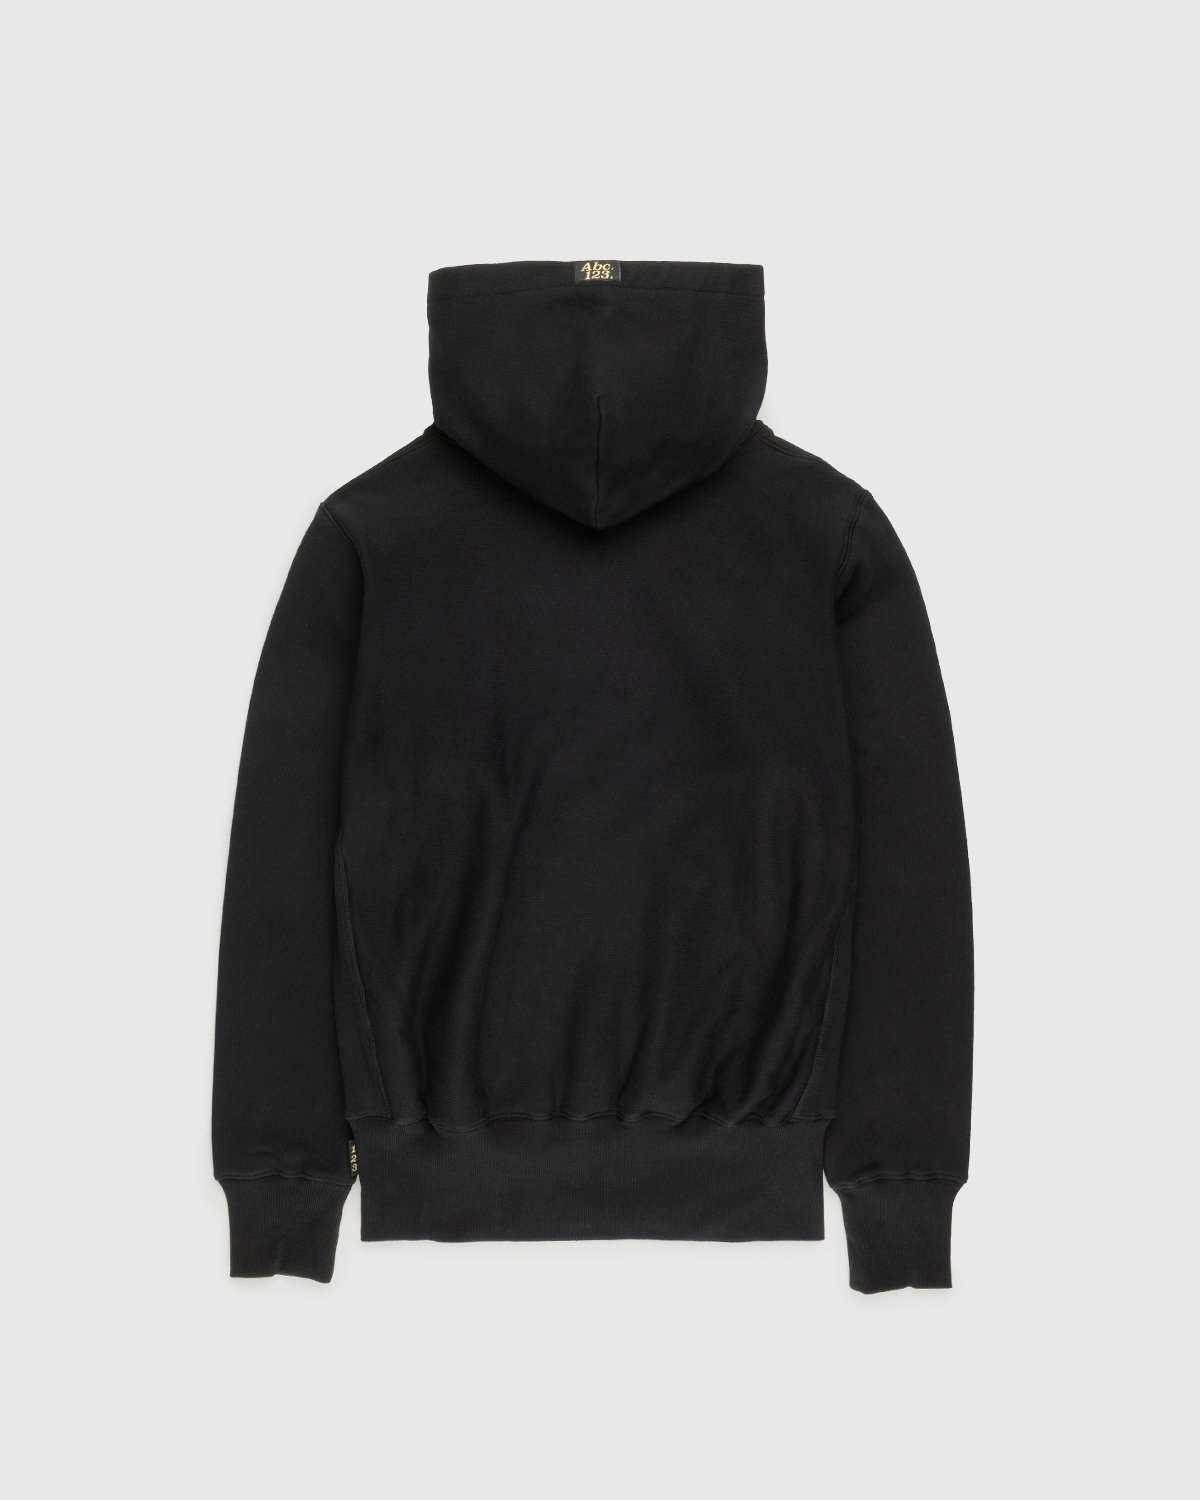 Abc. - Pullover Hoodie Anthracite - Clothing - Black - Image 2